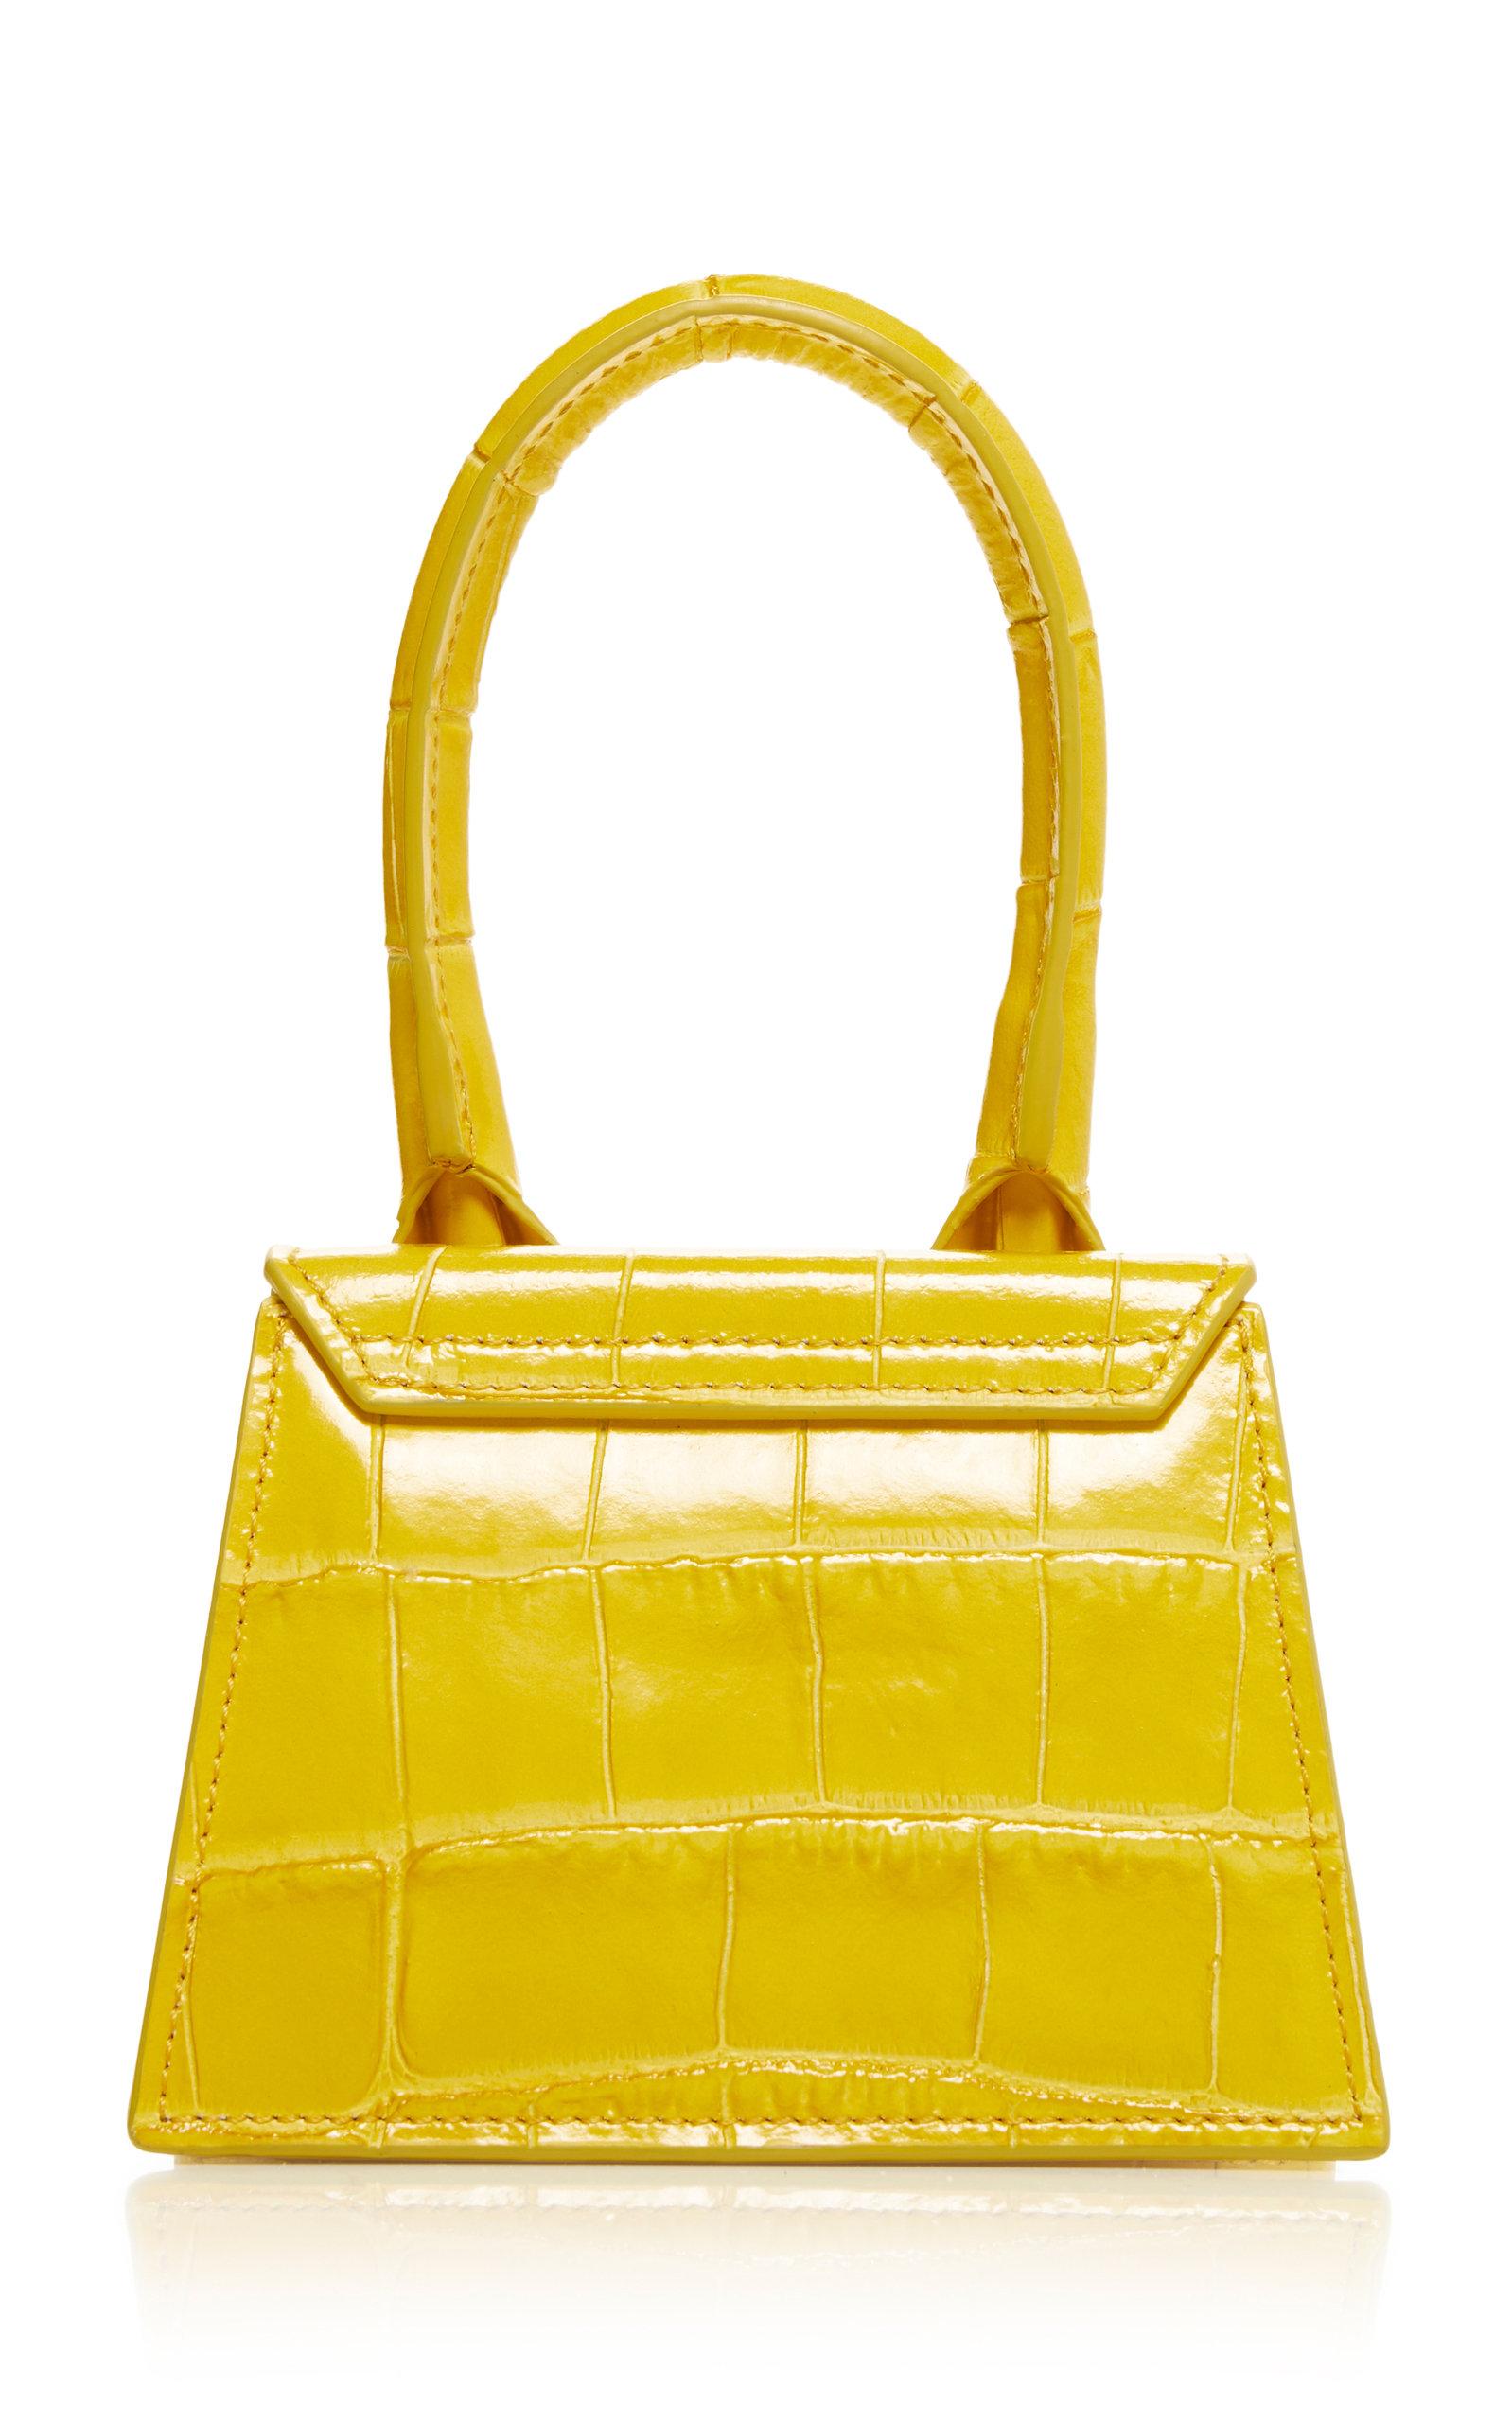 Jacquemus Le Chiquito Leather Mini Bag in Yellow | Lyst